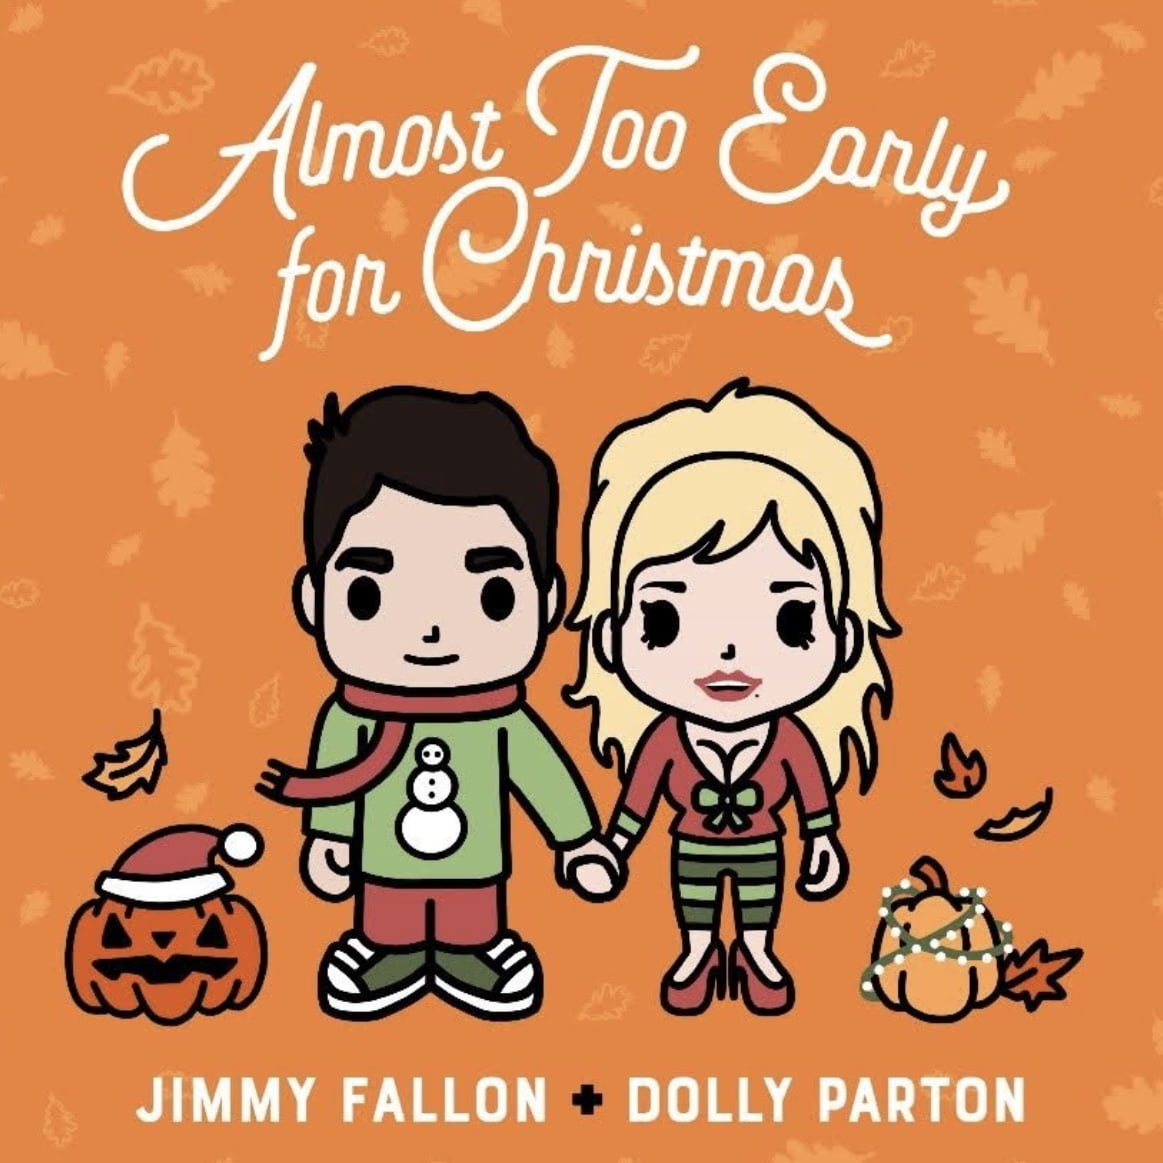 JIMMY FALLON & DOLLY PARTON “ALMOST TOO EARLY FOR CHRISTMAS” via Bryan Kehn by 360 Magazine